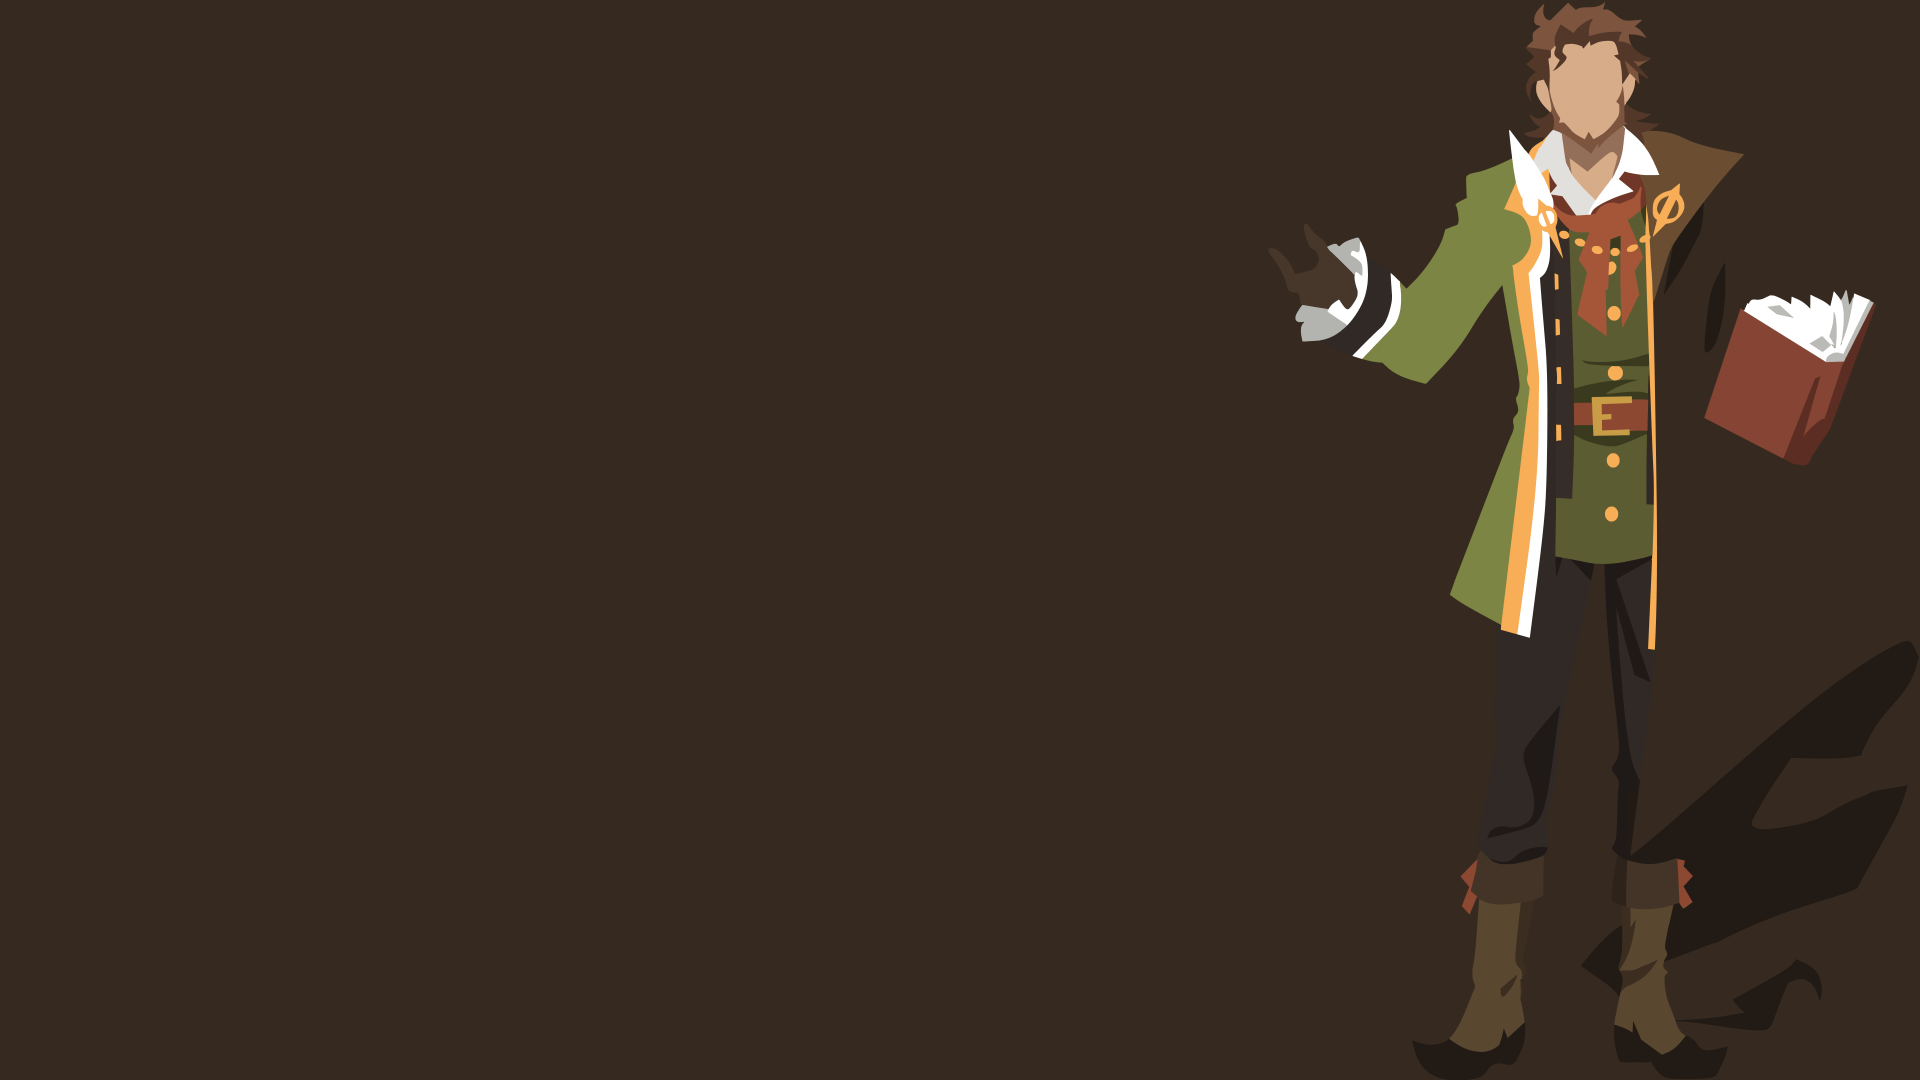 Caster of Red (Fate Apocrypha) Minimalist 8k Ultra HD Wallpaper